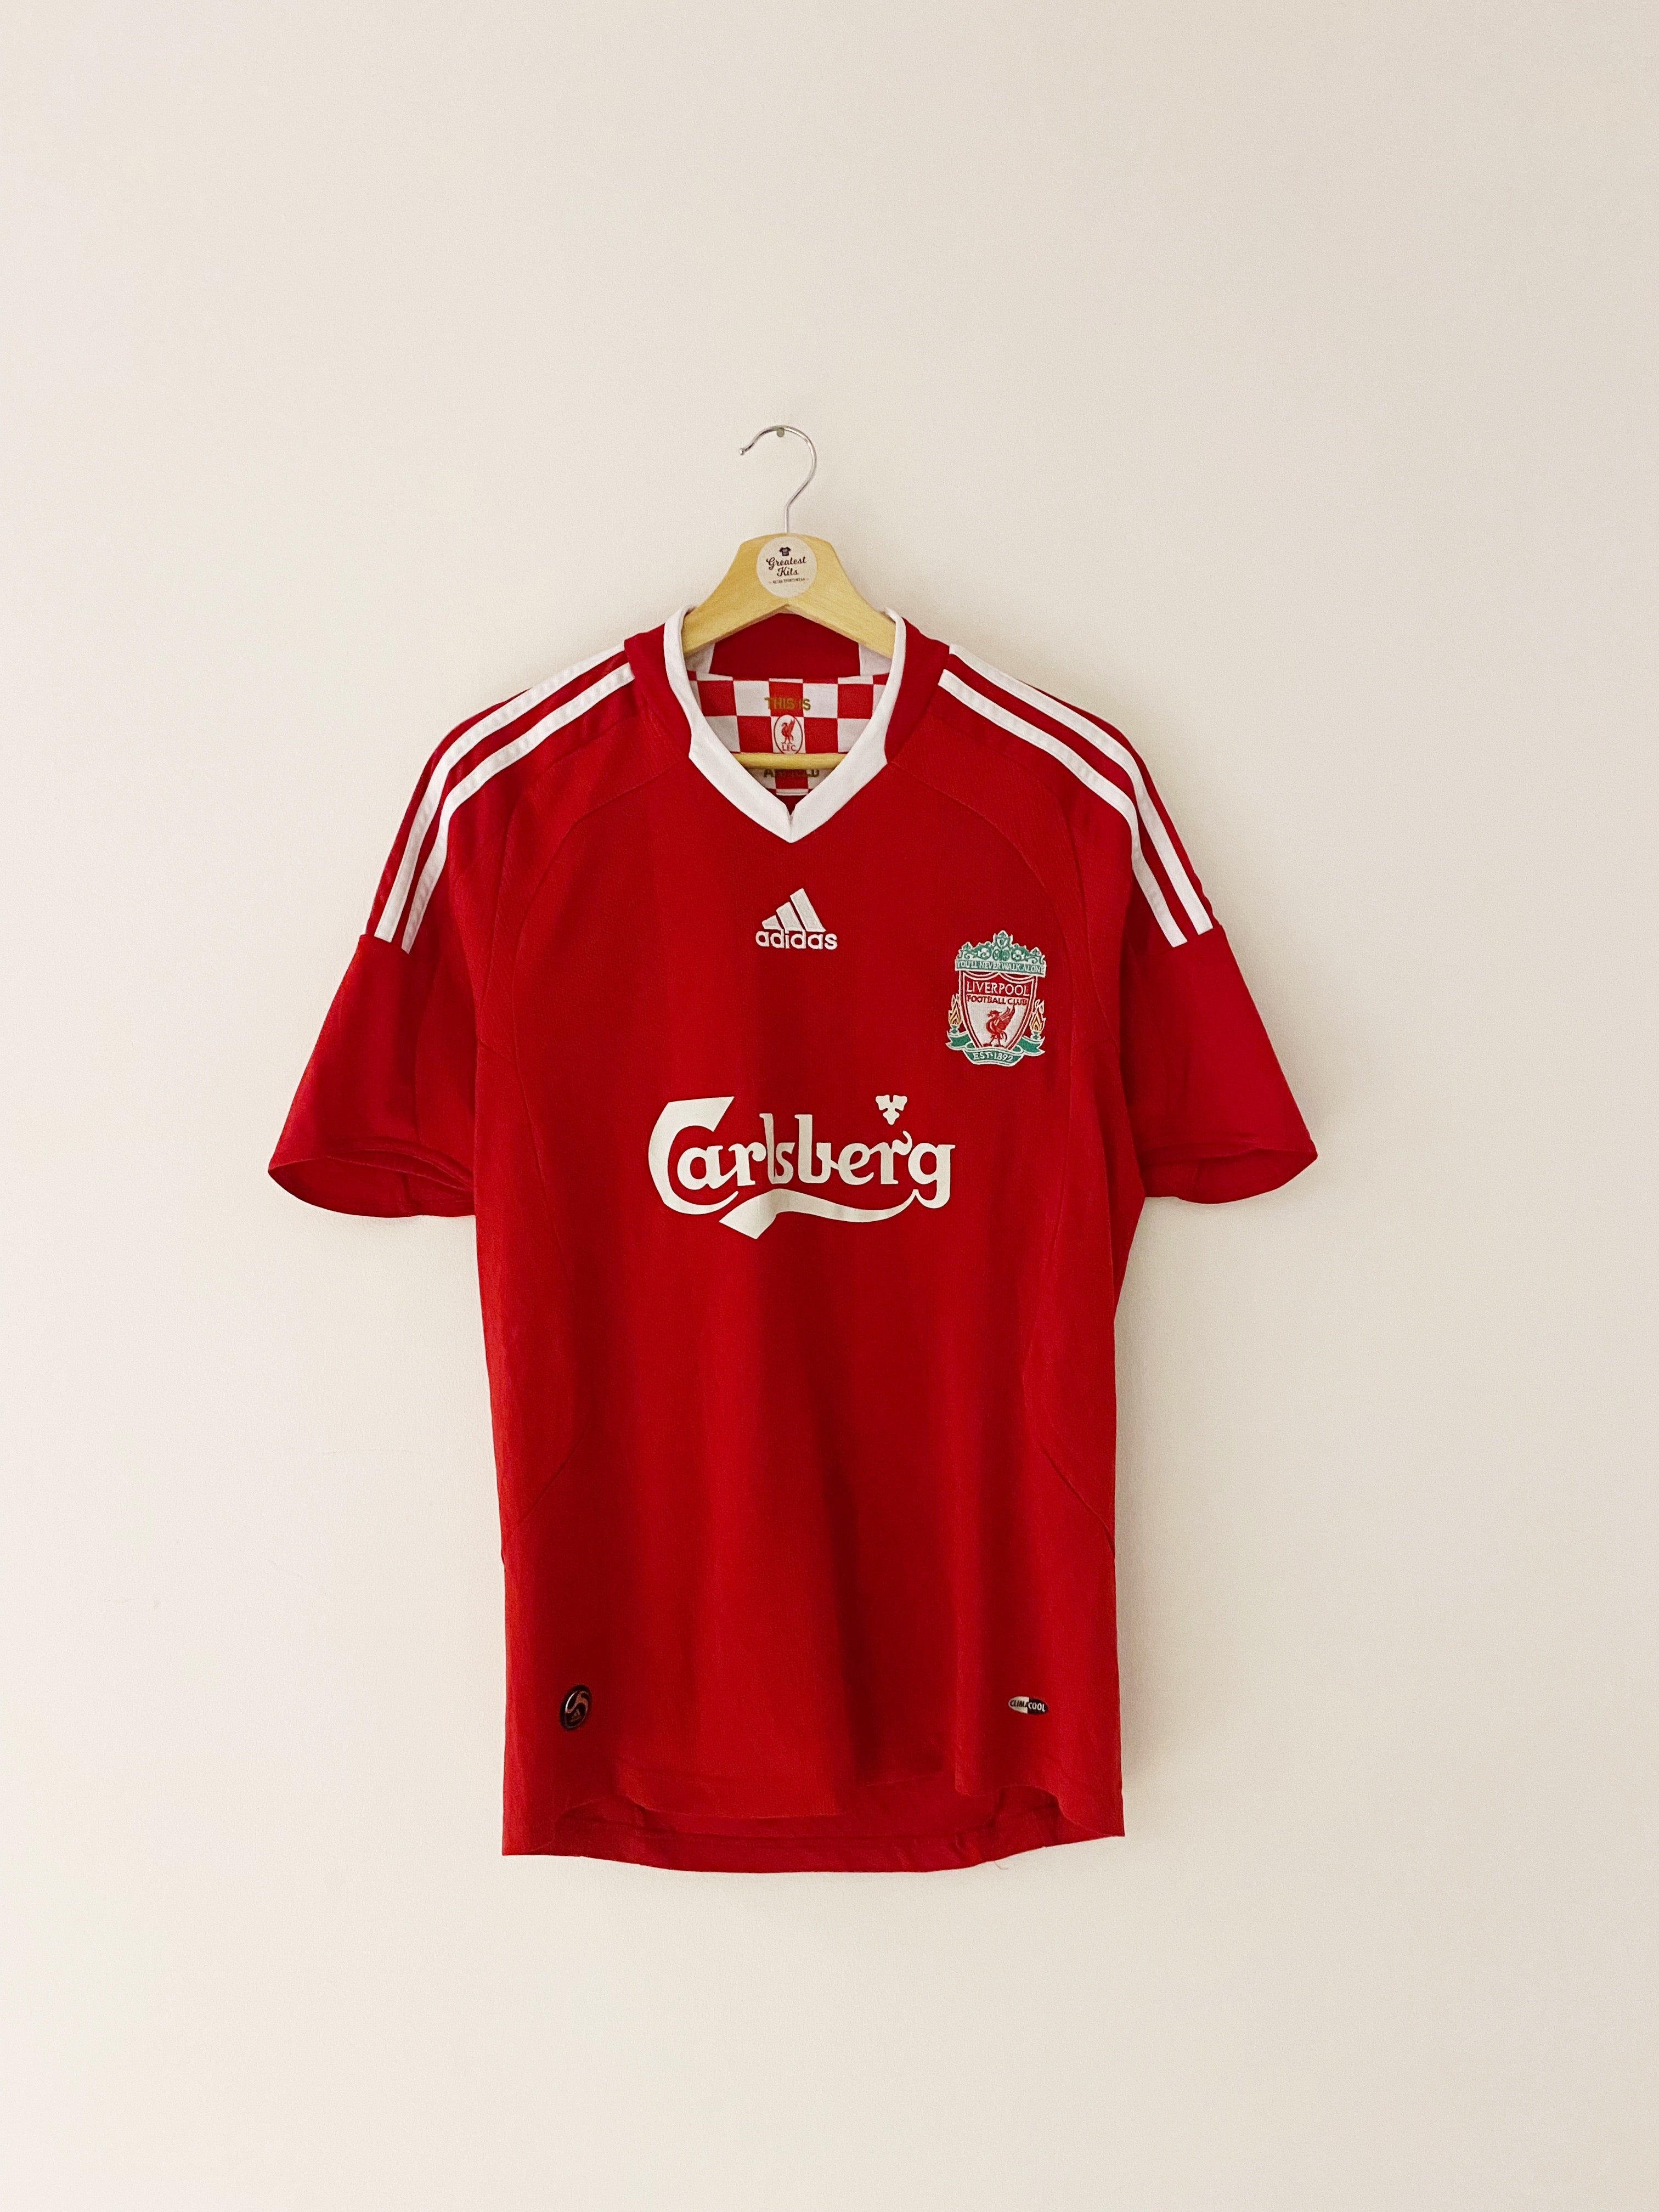 Retro Liverpool Home Jersey 2008/09 By Adidas